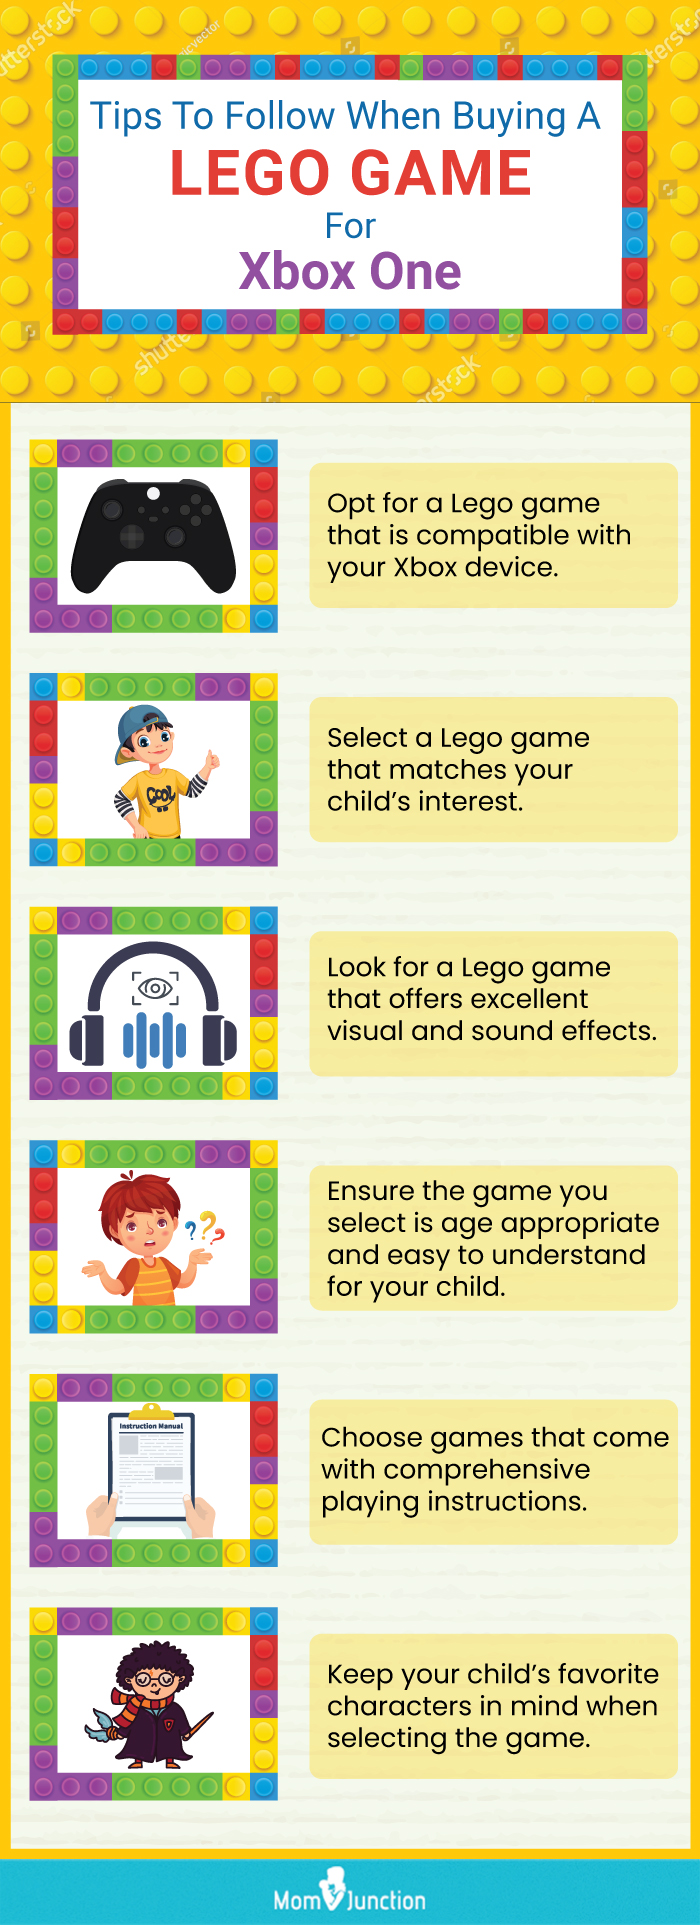 Tips To Follow When Buying A Lego Game For Xbox One